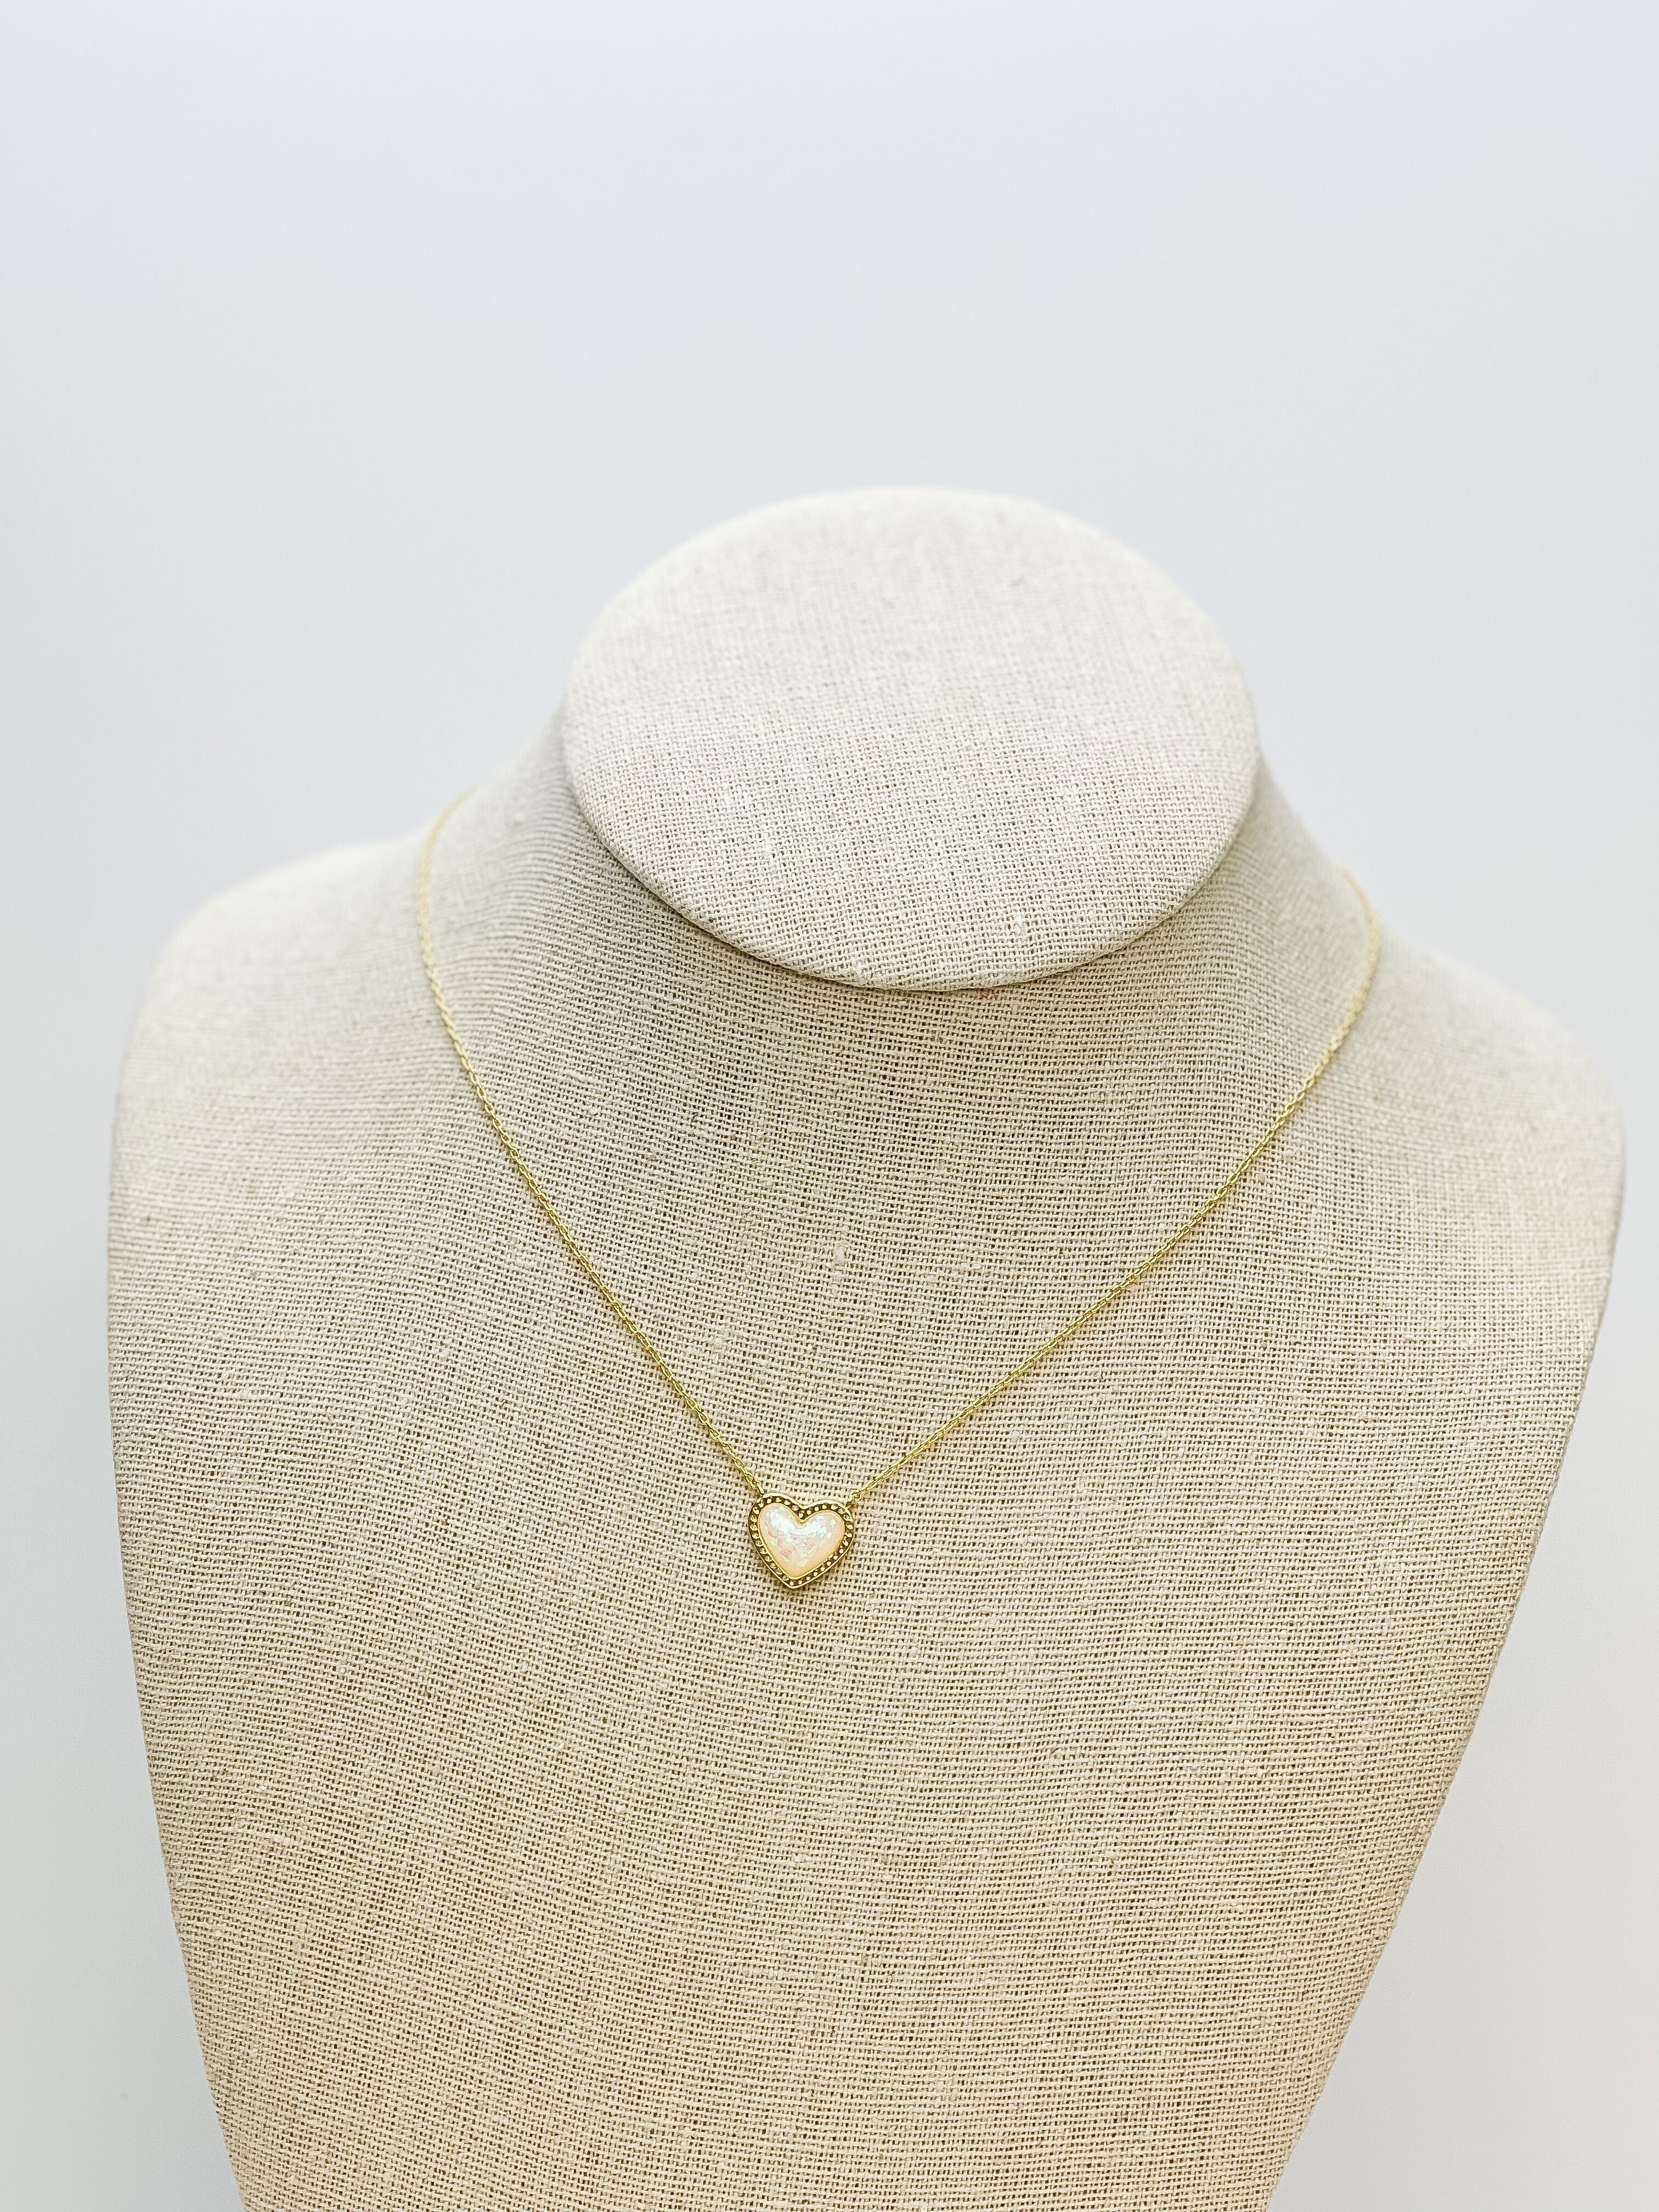 Bright Gold-Dipped Heart Charm Necklace - White